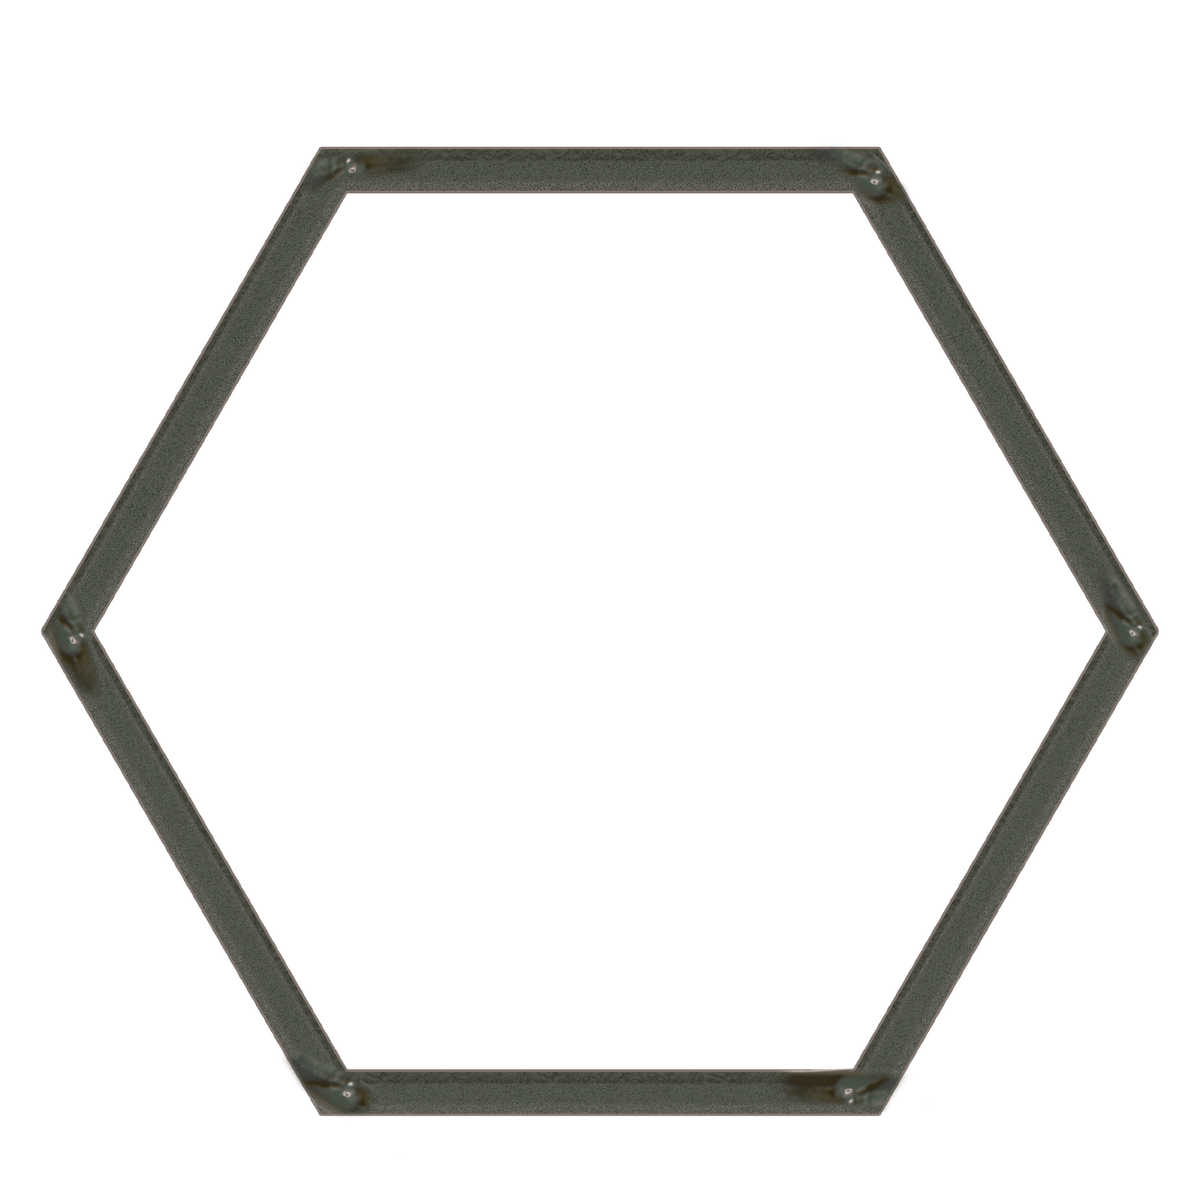 Hexagon - Custom Steel Frames made by Lee Display in different Shapes and Sizes Made by hand in the US. Lee Display manufactures custom-sized shapes using American steel. Hand-rolled into perfect circles & squares and then welded together. Choose over 1,000 different styles, sizes, and dimensions